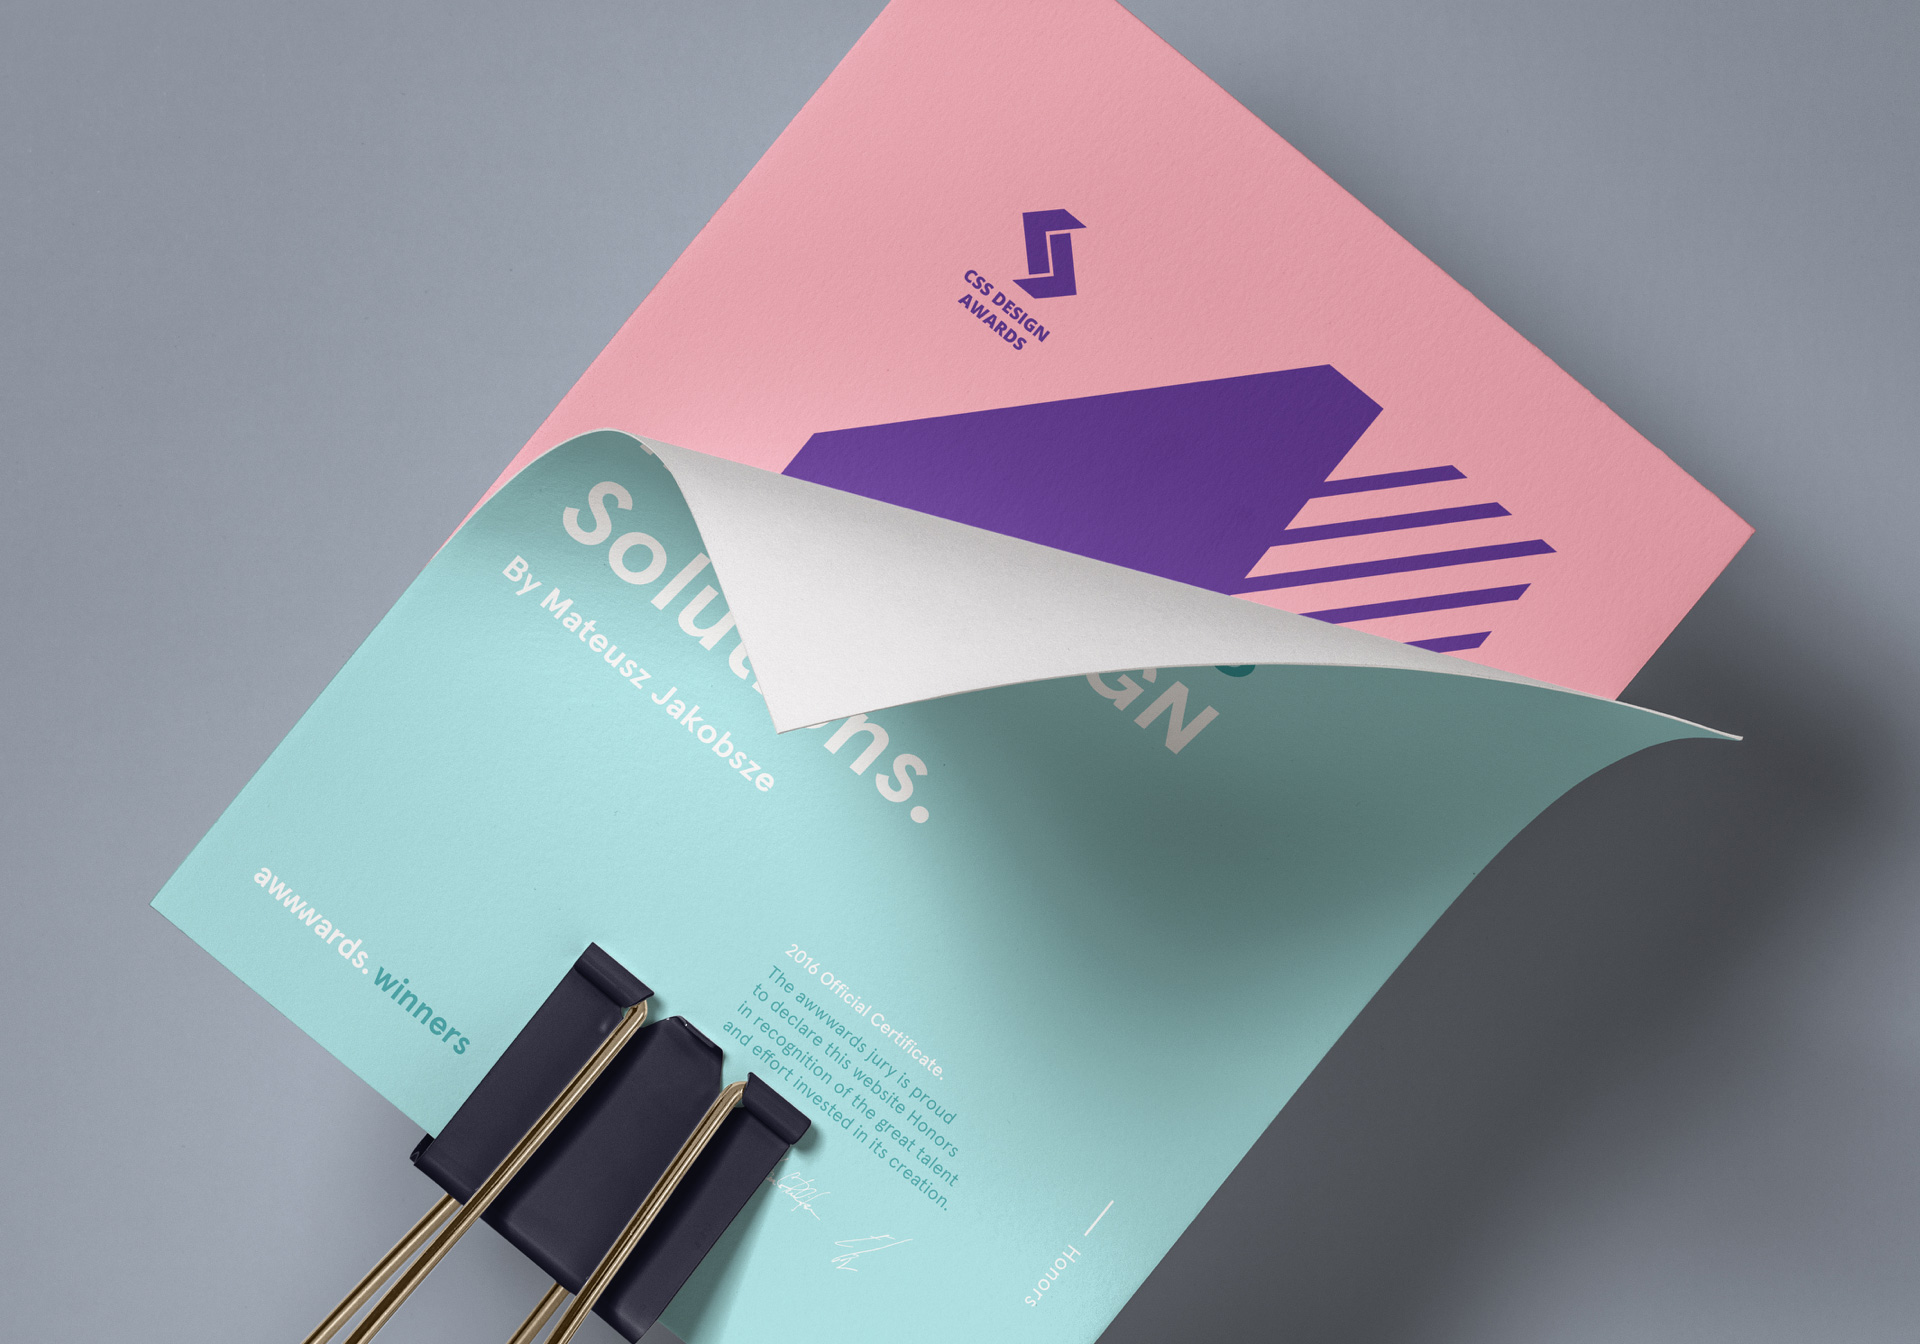 wrs-interior-ui-ux-design-jakobsze-freelance-awwwards-special-kudos-honorable-mention-2